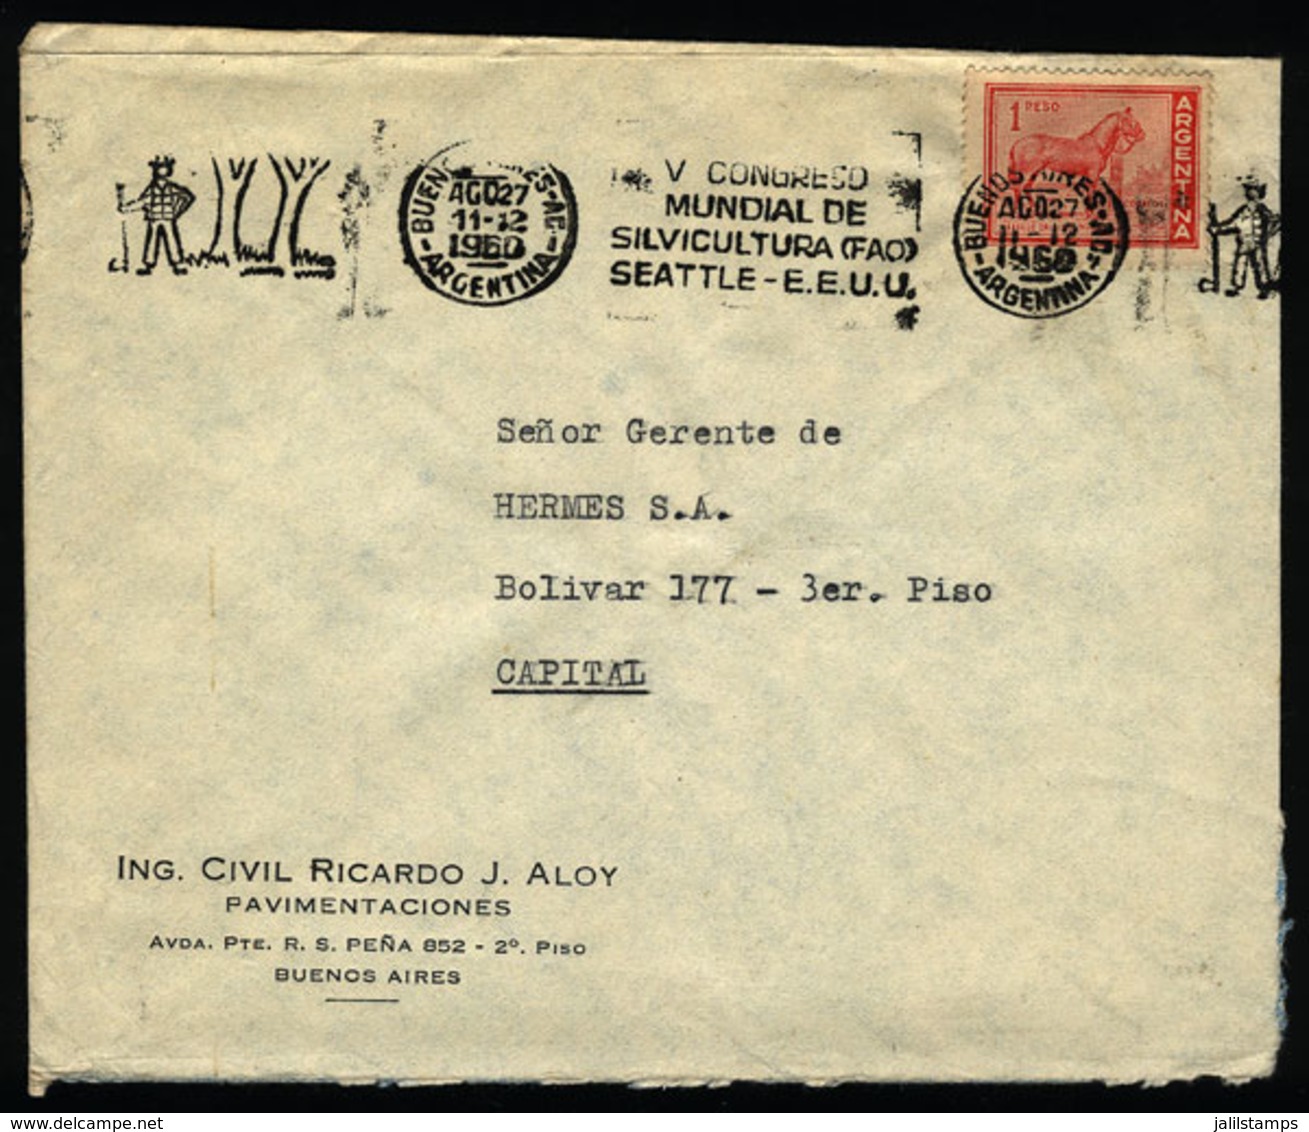 ARGENTINA: Cover Used In Buenos Aires On 27/AU/1960, With Slogan Cancel "Intl. Congress Of Forestry - Seattle USA", VF Q - Cartas & Documentos